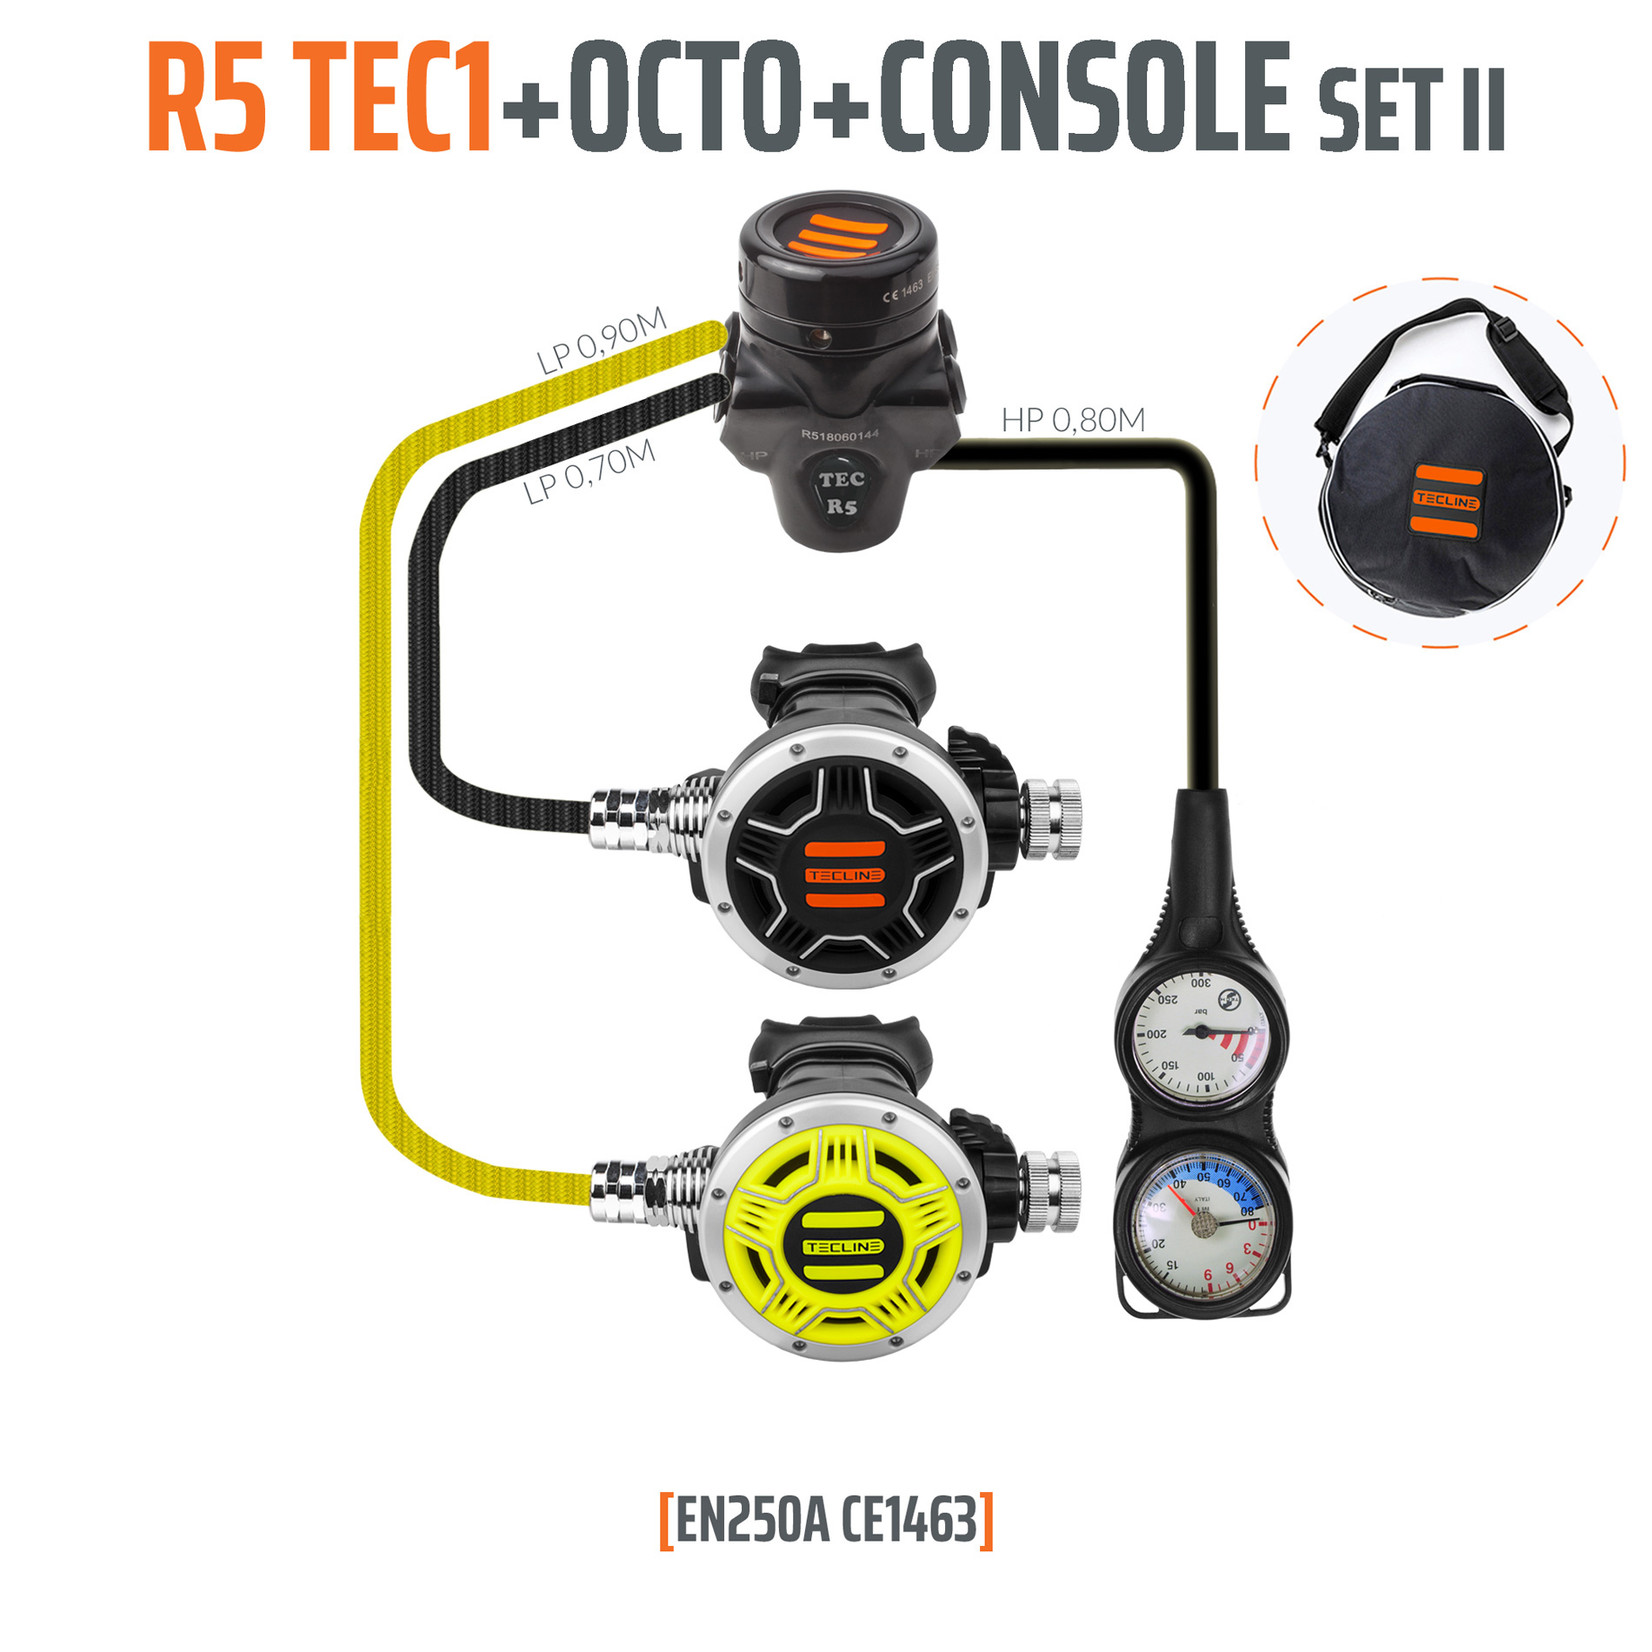 Tecline Regulator R5 TEC1 set II with octo and 2 elements console - EN250A